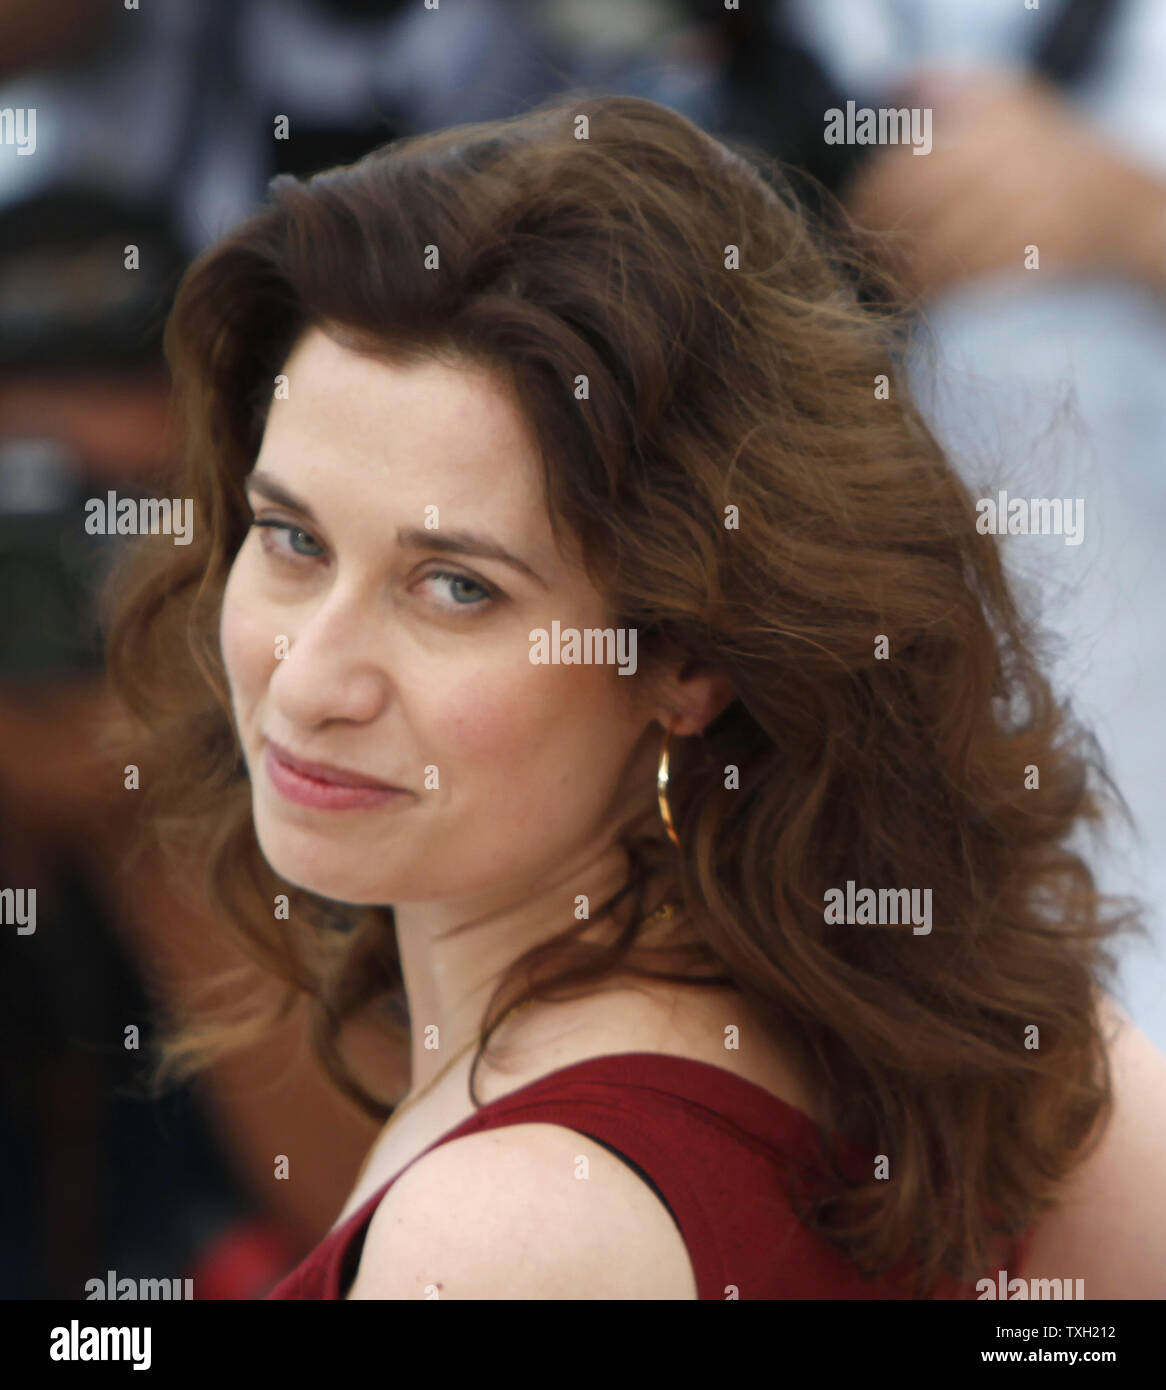 Actress Emmanuelle Devos arrives at a photocall for the film 'A l'origine' at the 62nd annual Cannes Film Festival in Cannes, France on May 21, 2009.   (UPI Photo/David Silpa) Stock Photo